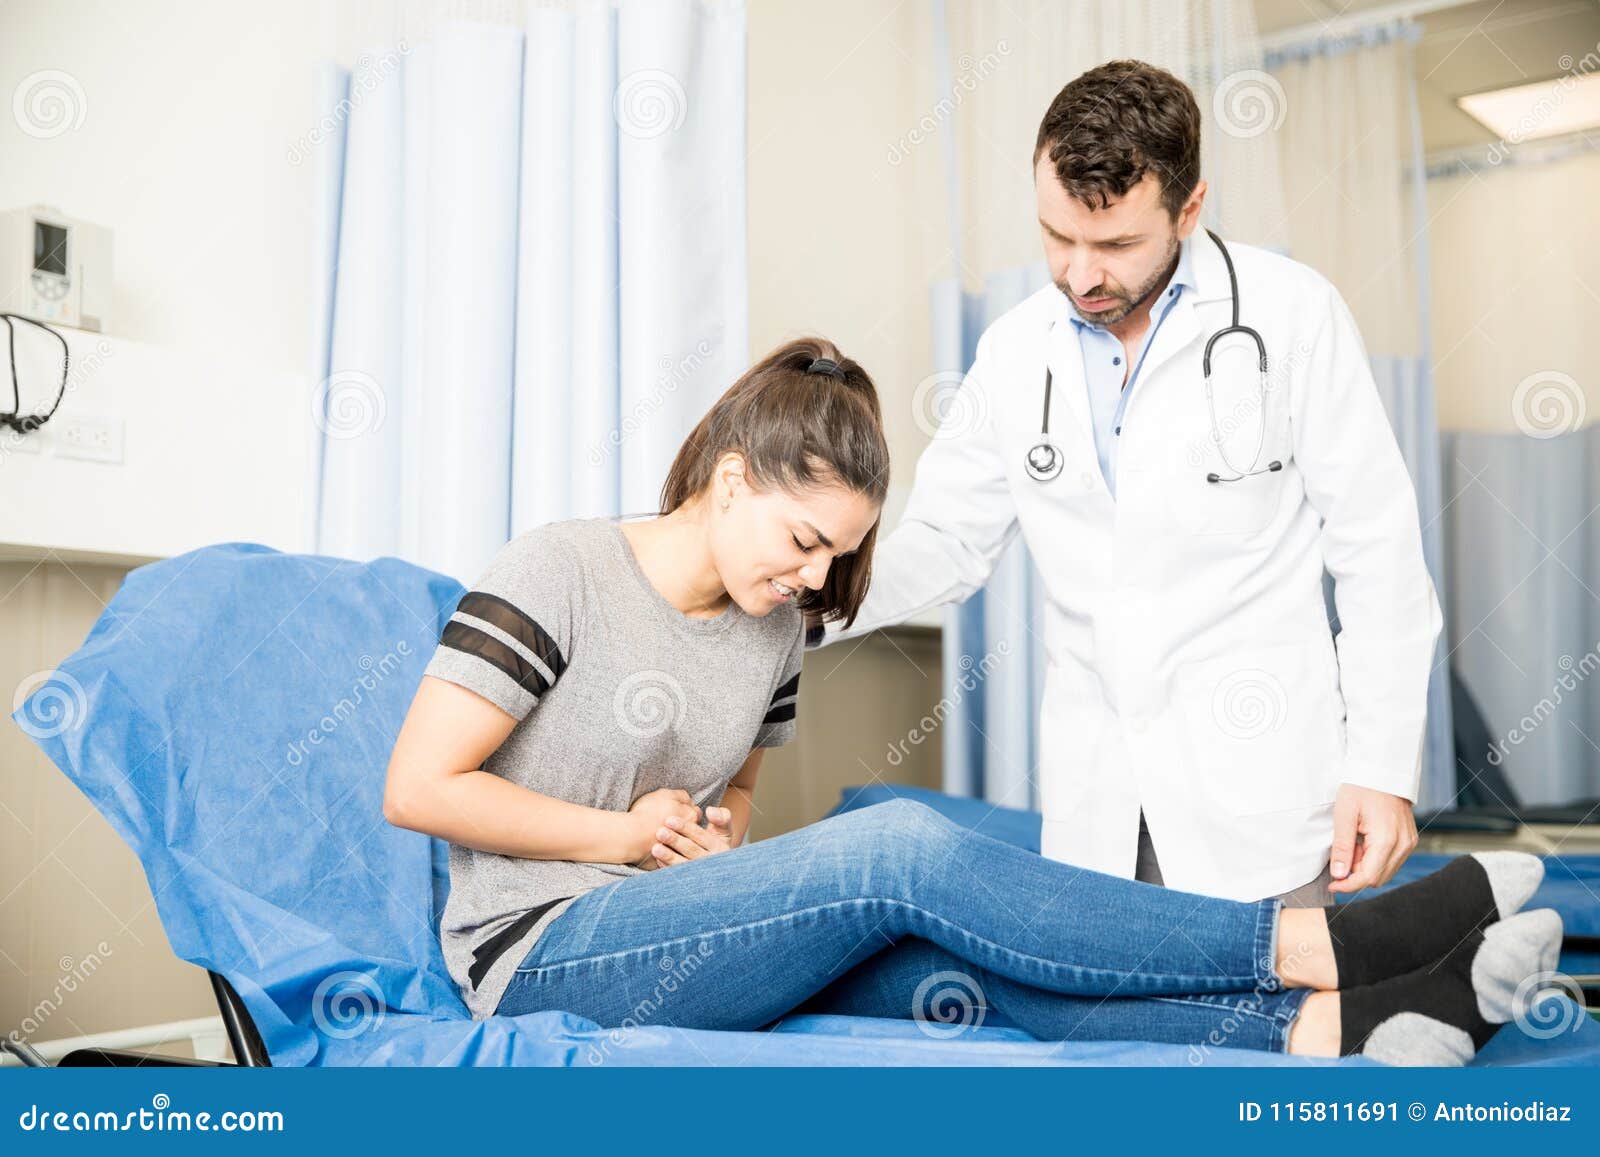 woman with stomach ache visiting doctor